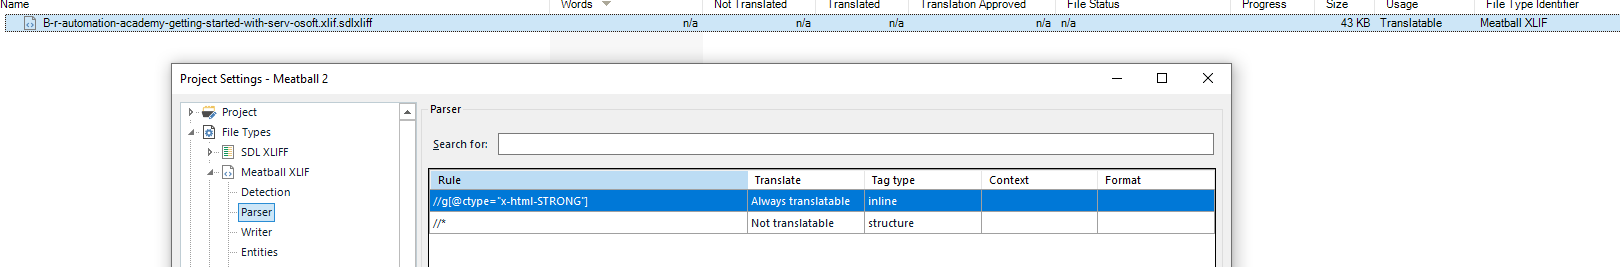 Trados Studio Project Settings showing parser rules for XML tags with 'x-html-STRONG' treated as inline.